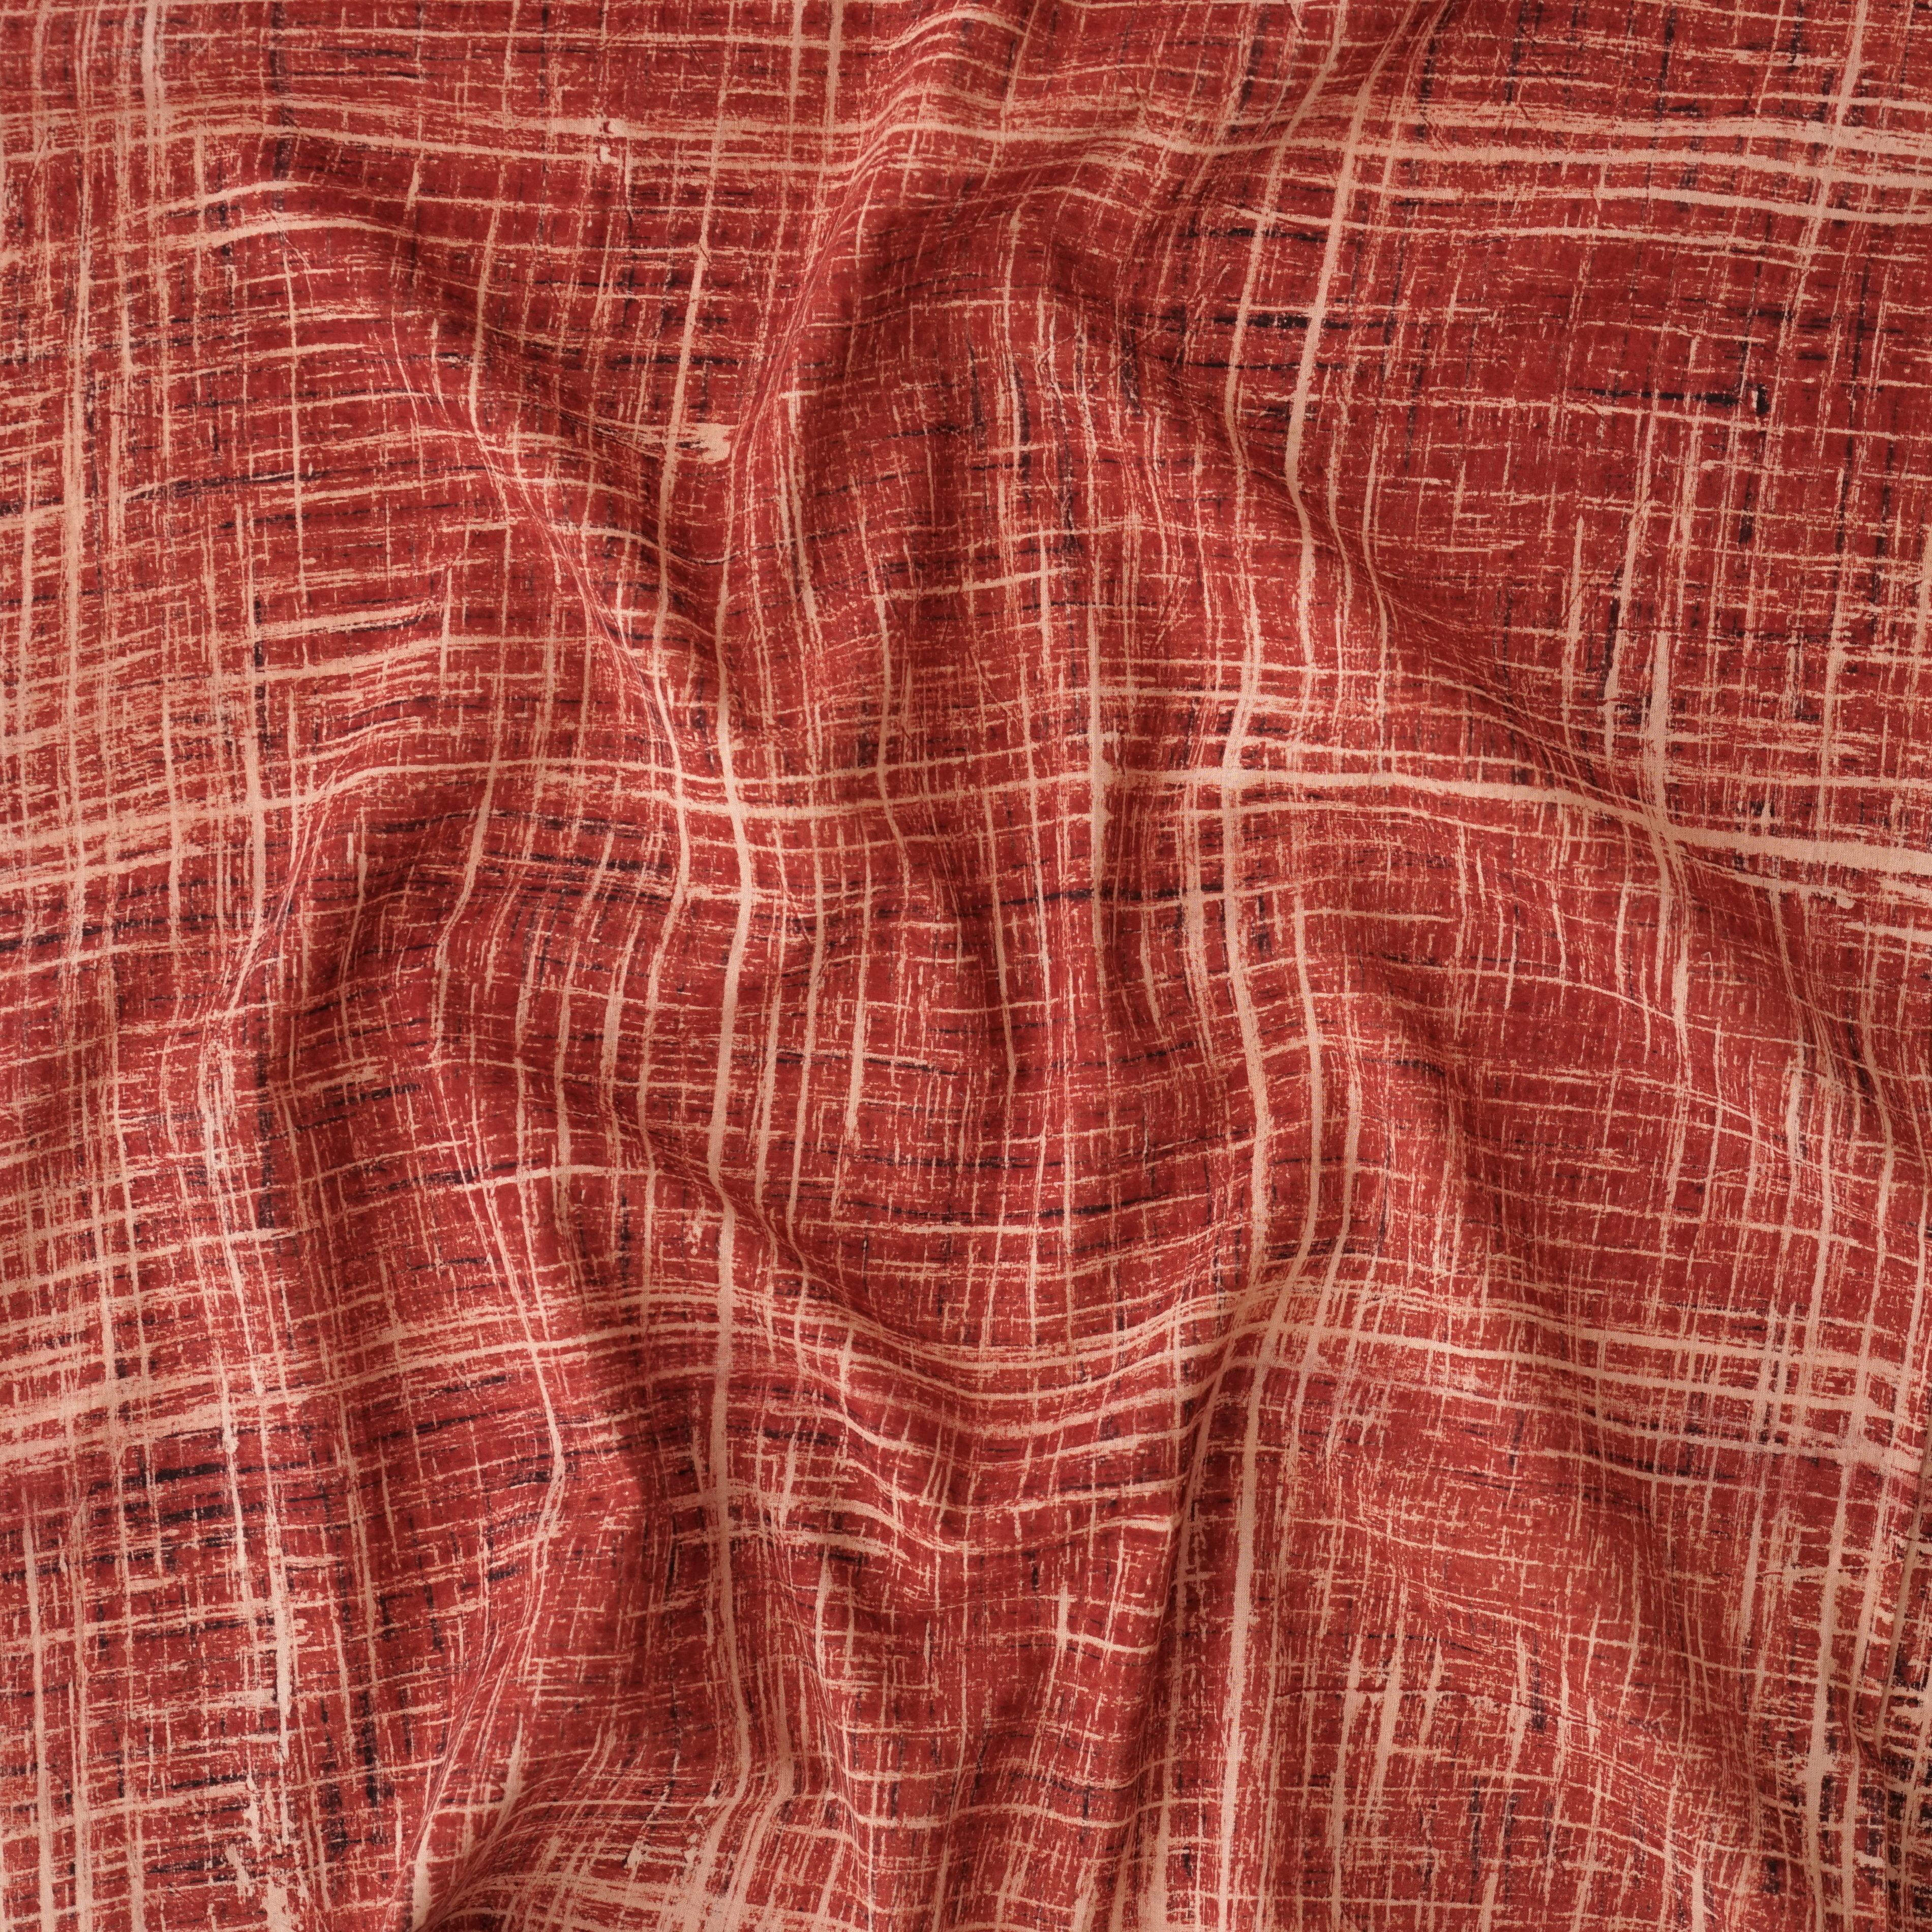 2. Brush Print - 100% Cotton Fabric - Hand-Brushed - Red - Contrast